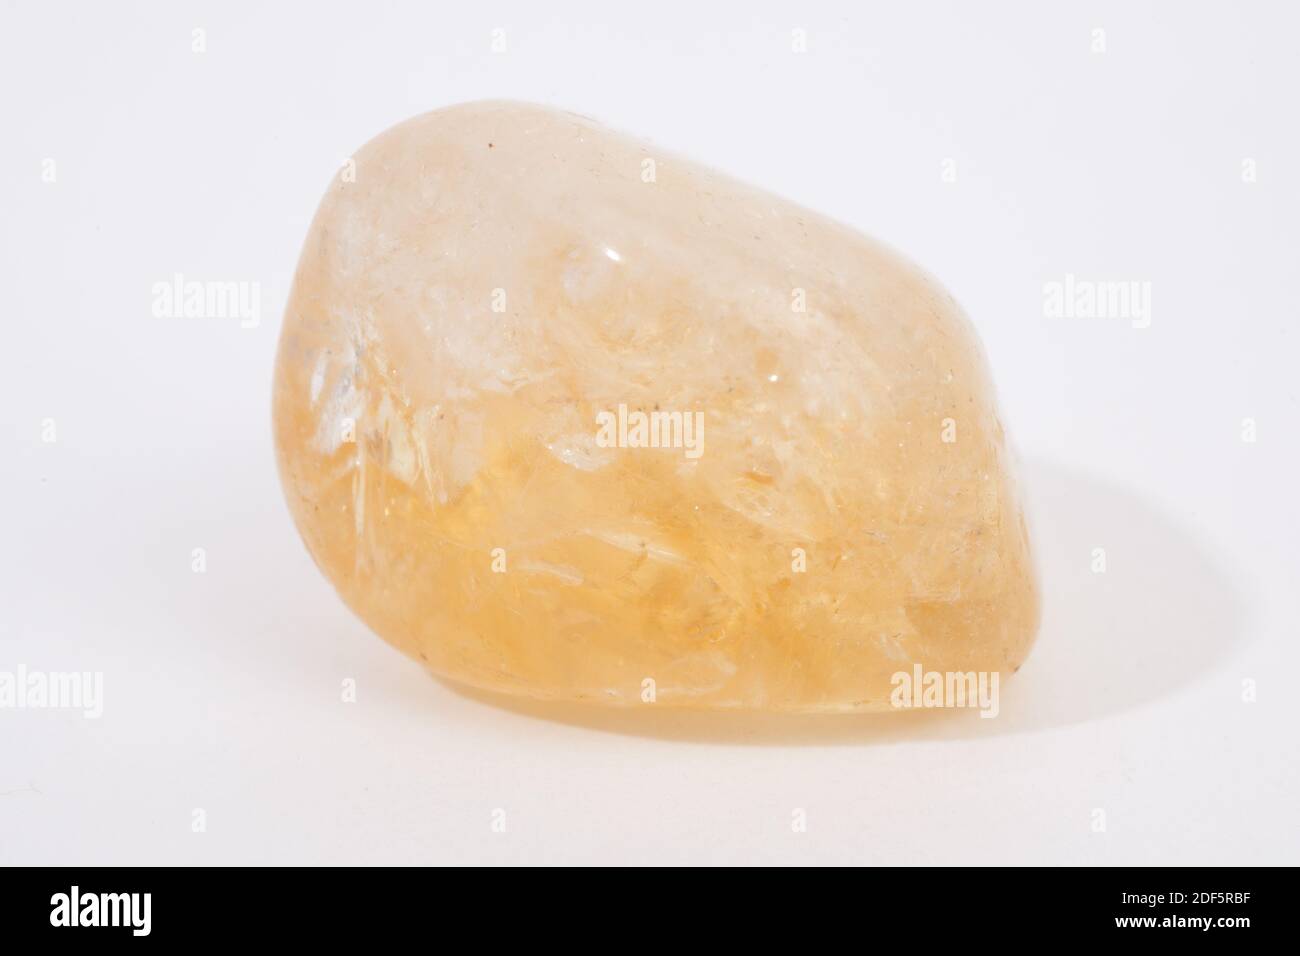 A citrine gemstone isolated against a white studio backdrop Stock Photo